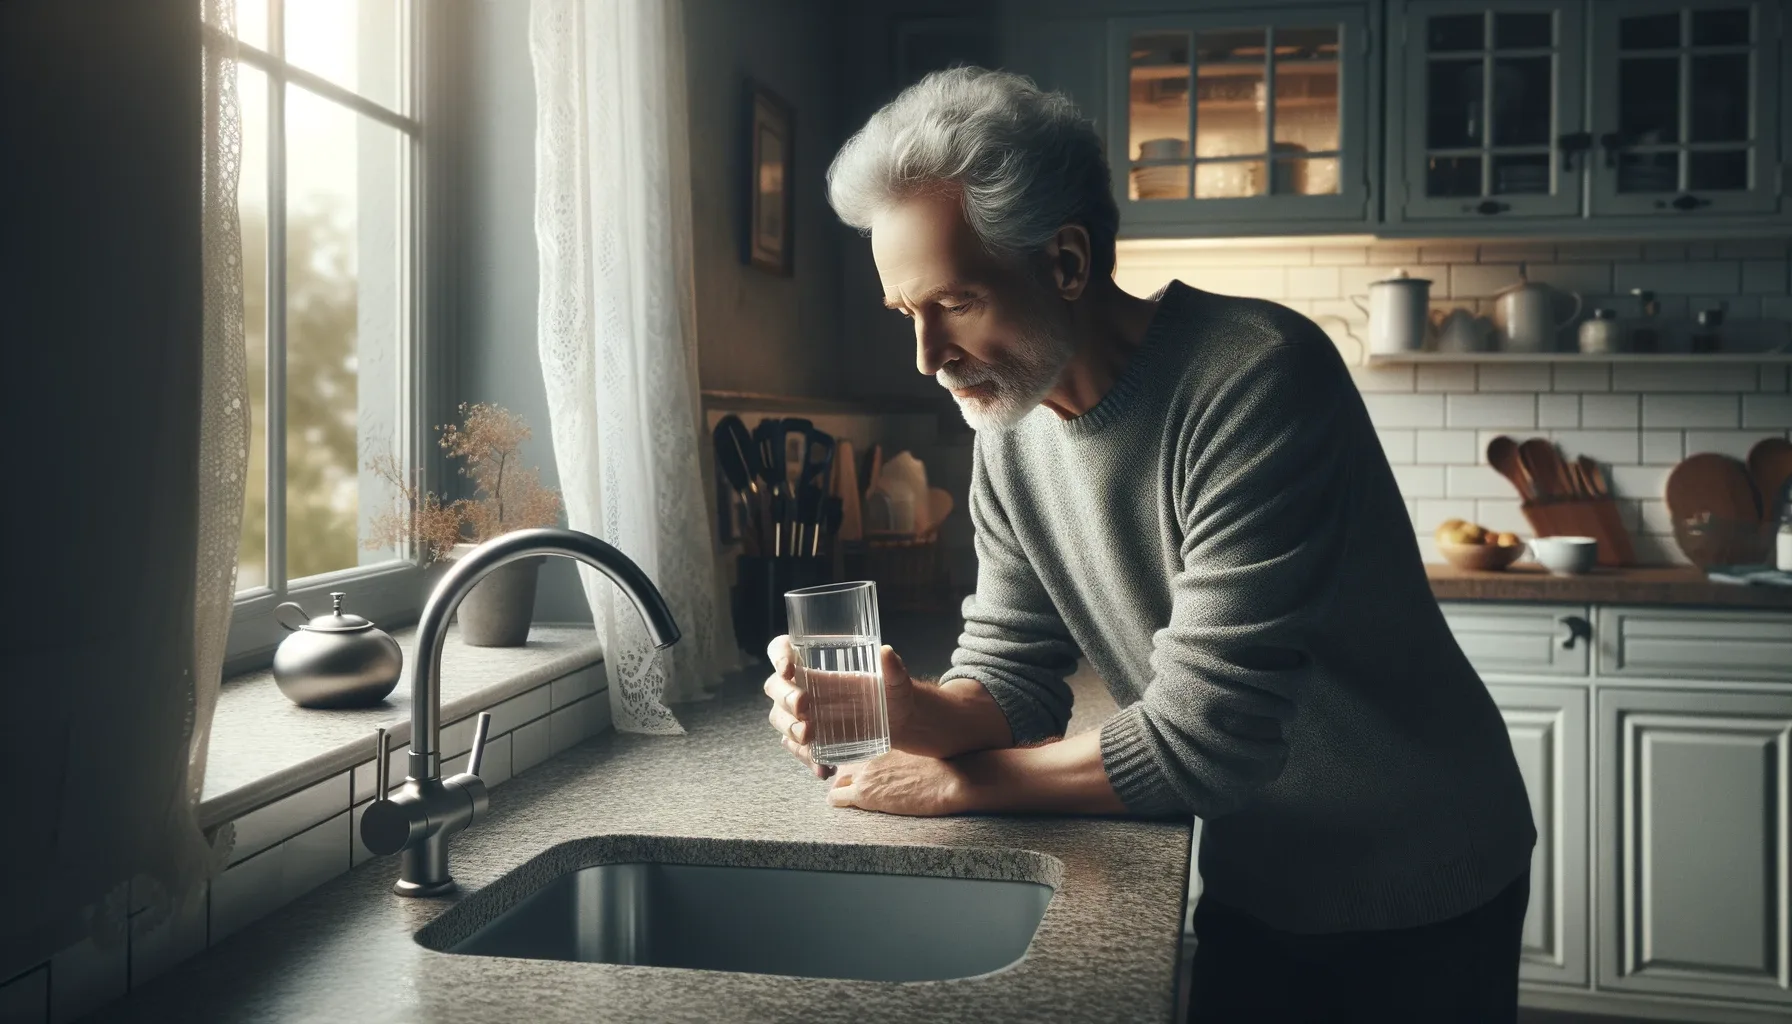 An older man with a glass of water leans on his kitchen sink. He is in chronic pain.